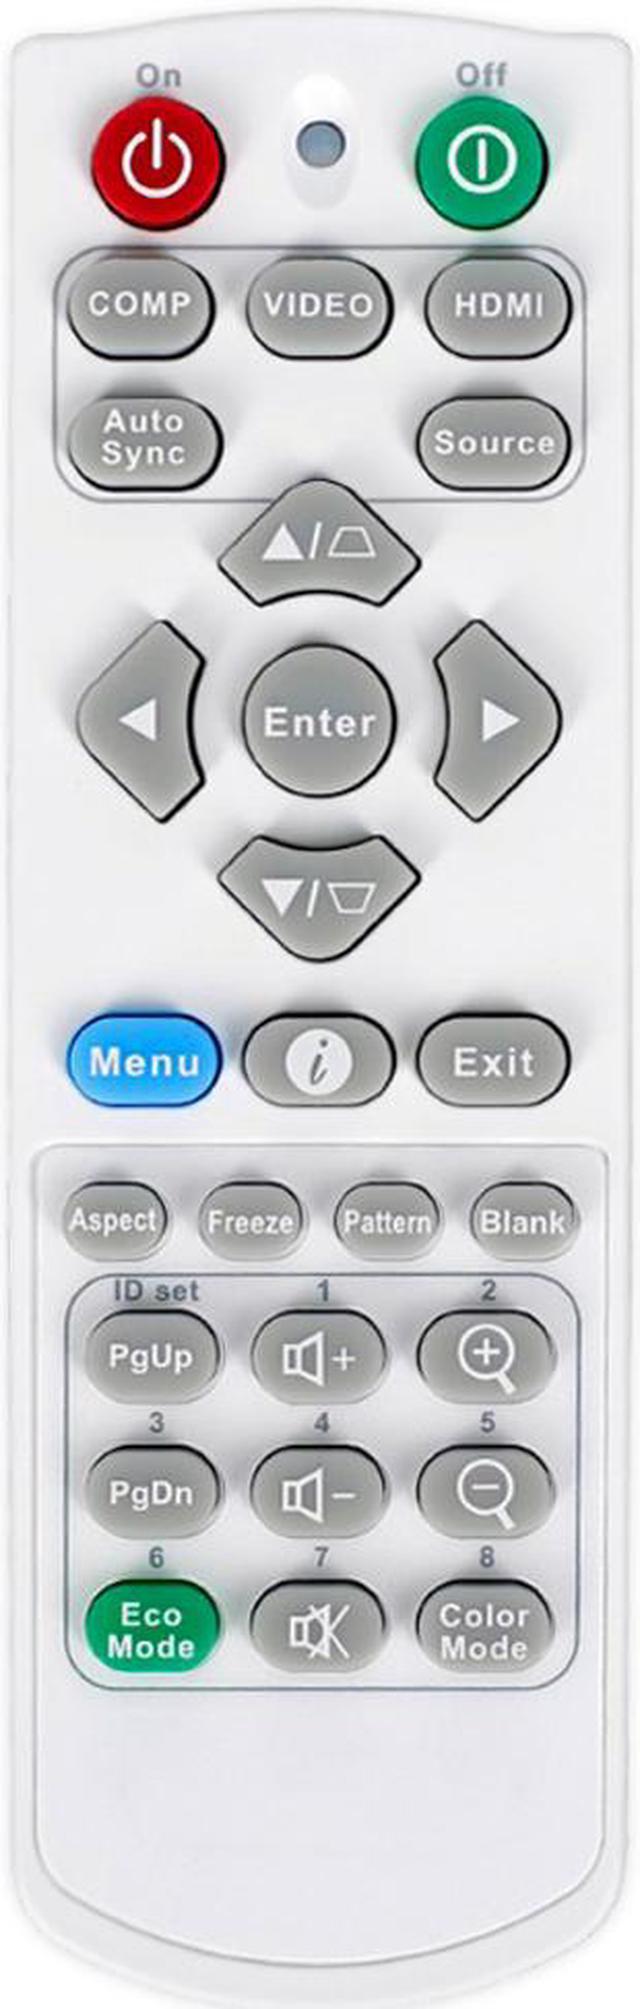 PA503S PA502X PA500X PA501S Leankle Remote Controller A-00010005 for ViewSonic Projectors PA500S PA502SP PA503SP PA502S PG701WU PA503X PG700WU PA502XP PA503W PJD5154 PJD5152 PA503XP